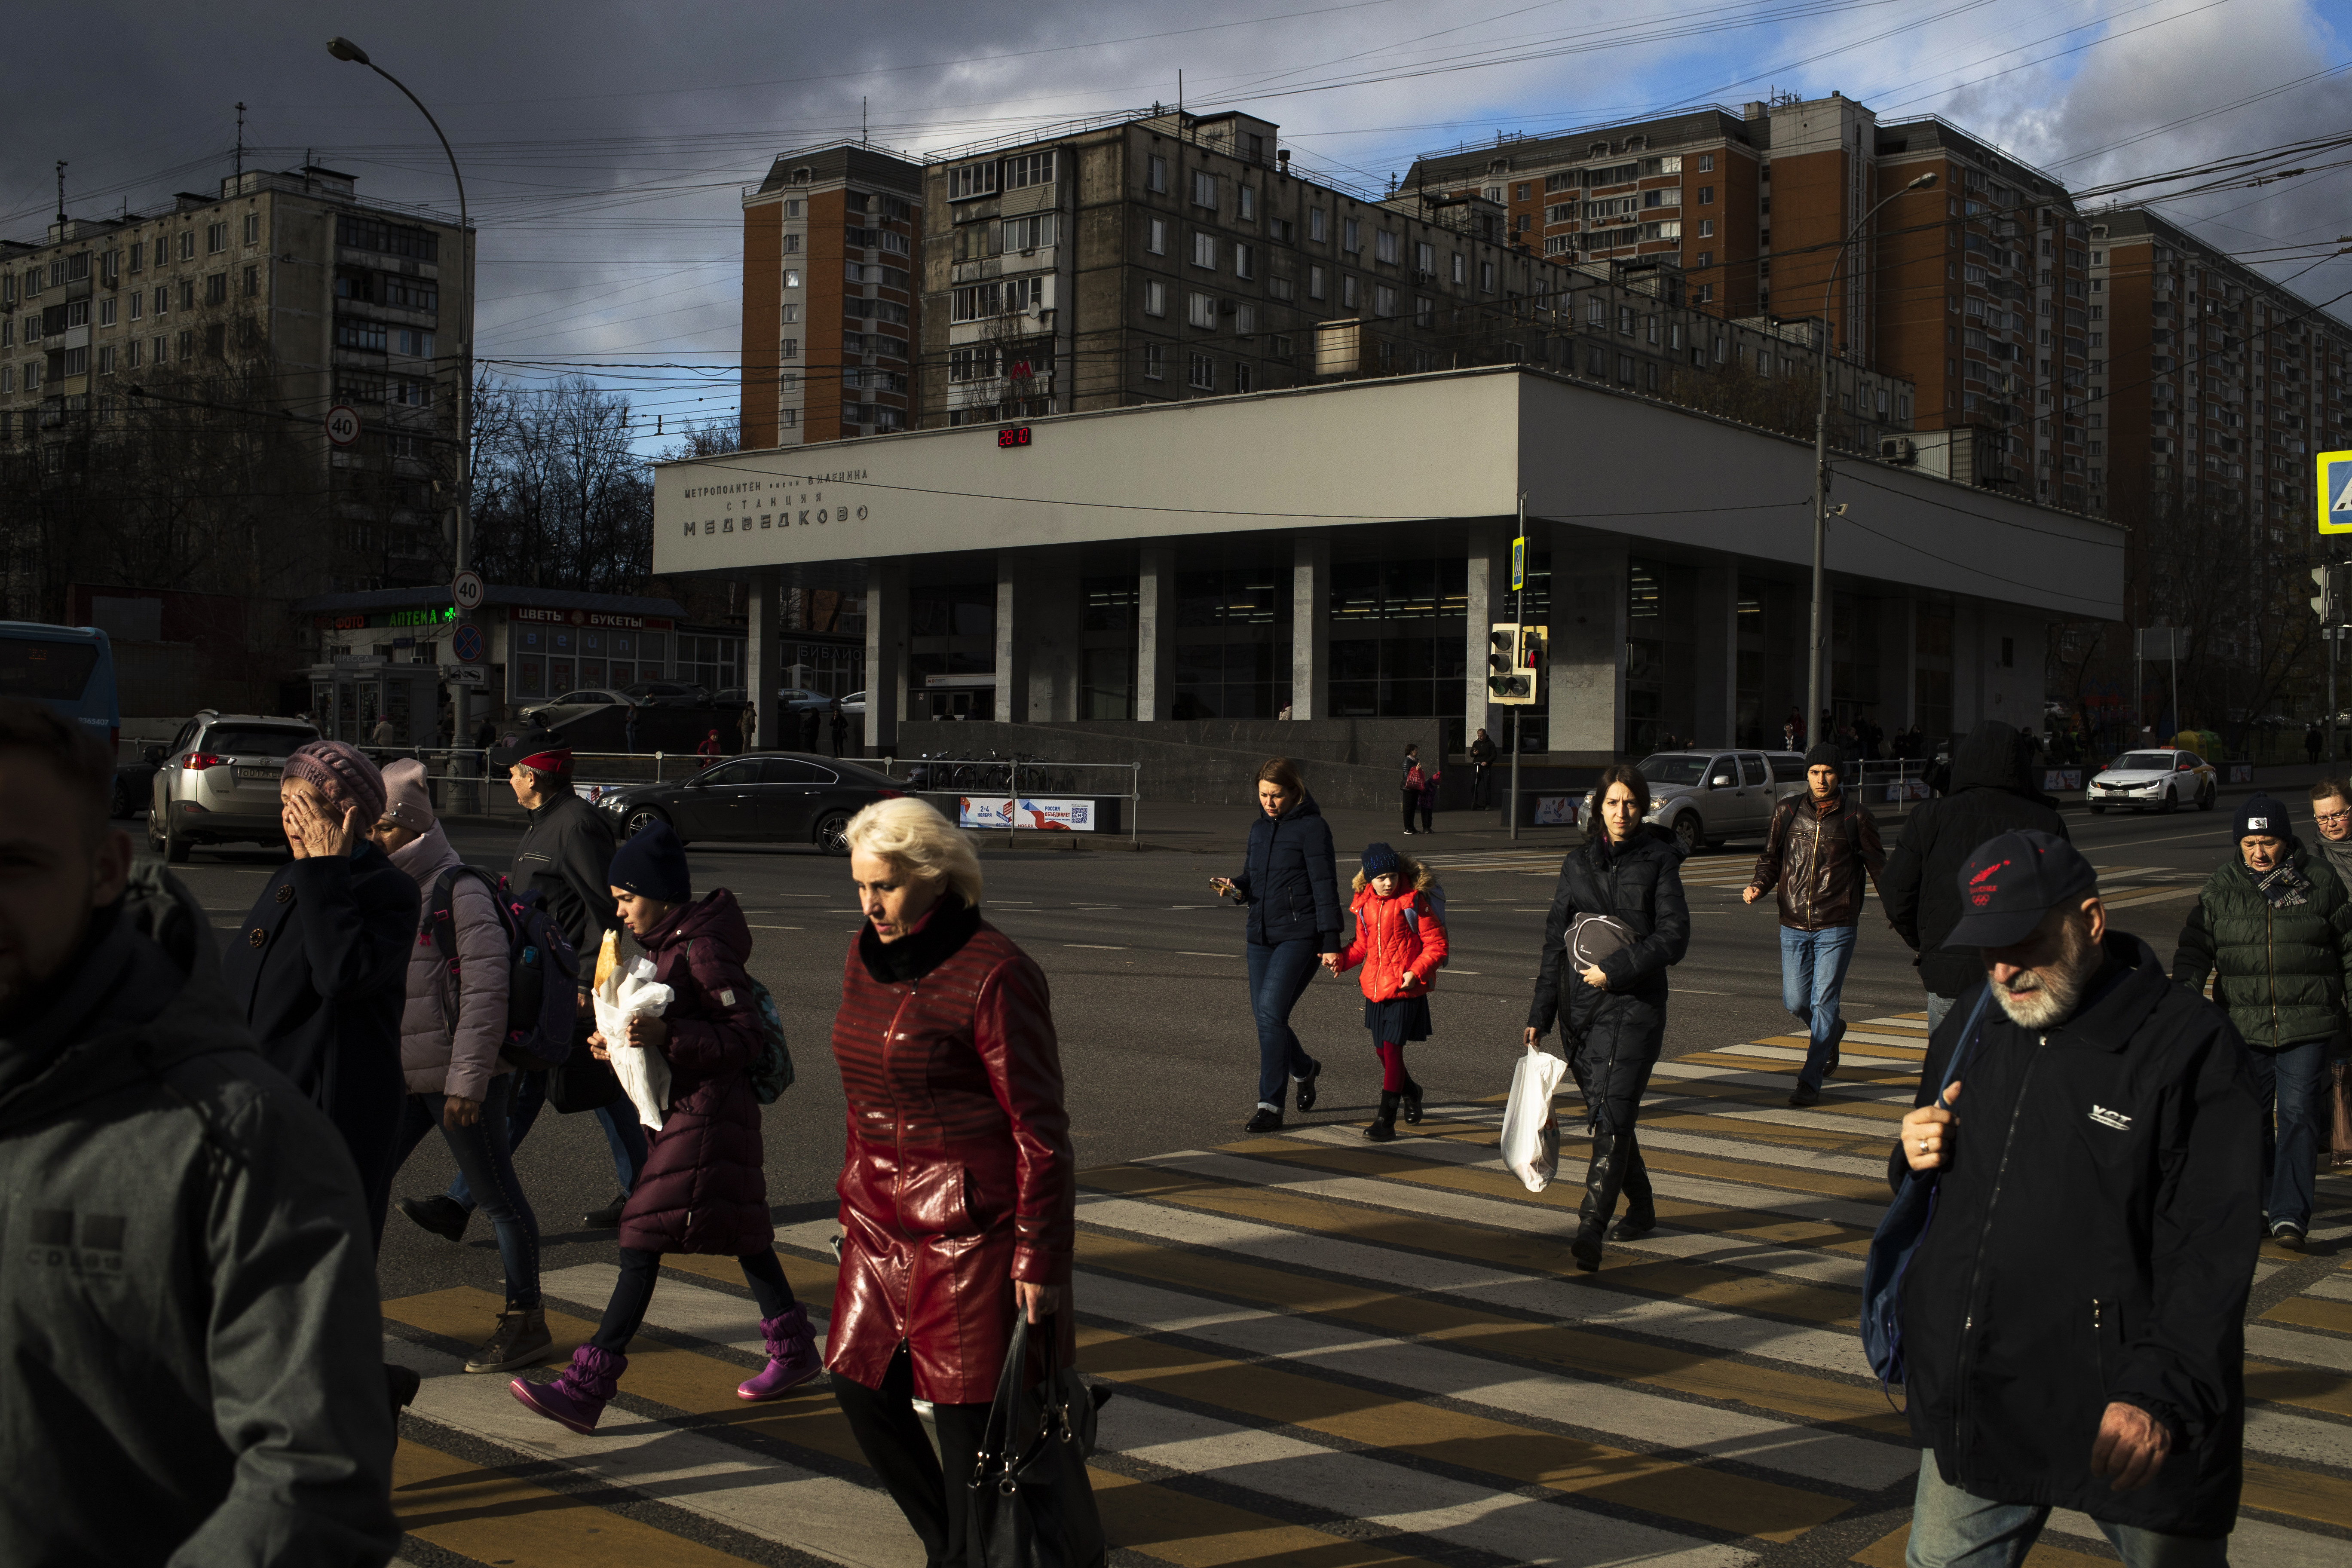 People cross a street on a sunny autumn day in Moscow, Russia, Monday Oct. 28, 2019. (AP Photo/Pavel Golovkin)